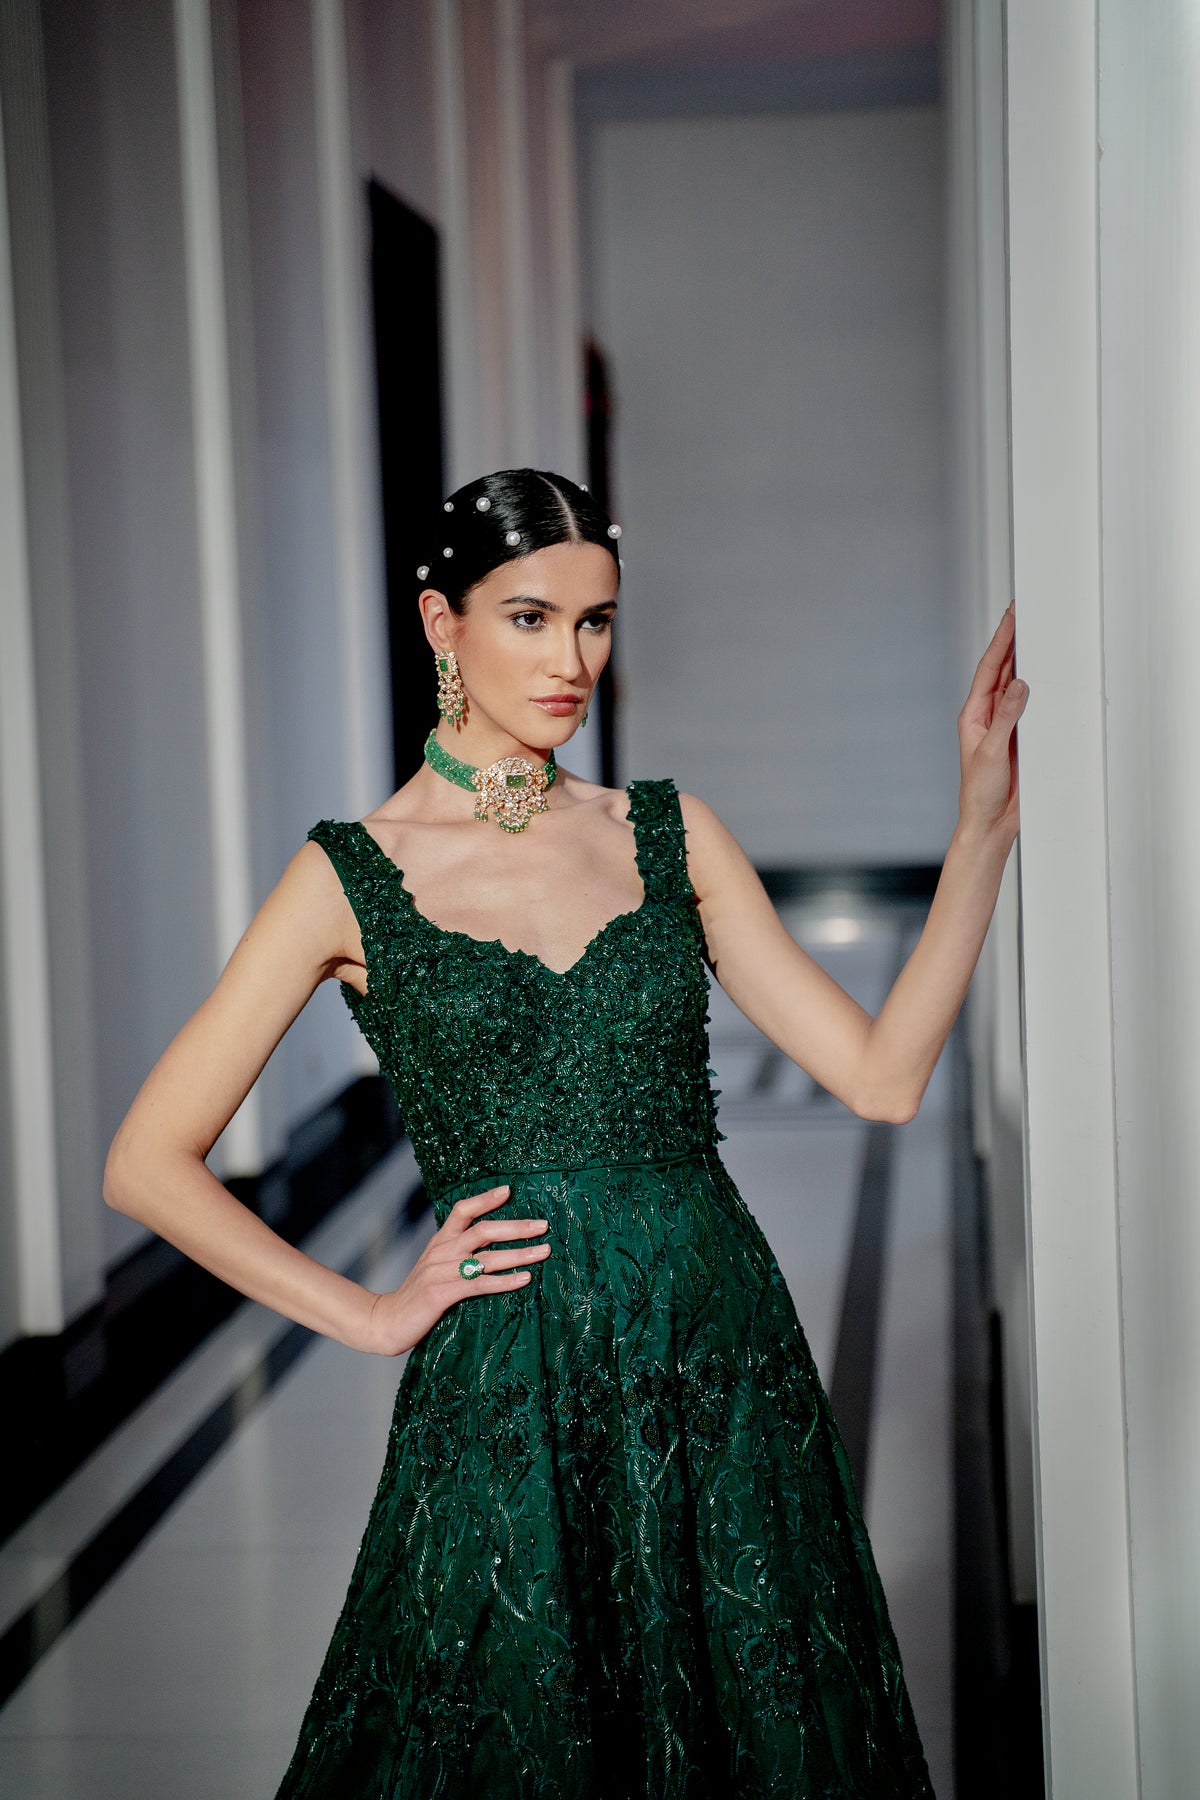 Emerald green floral gown